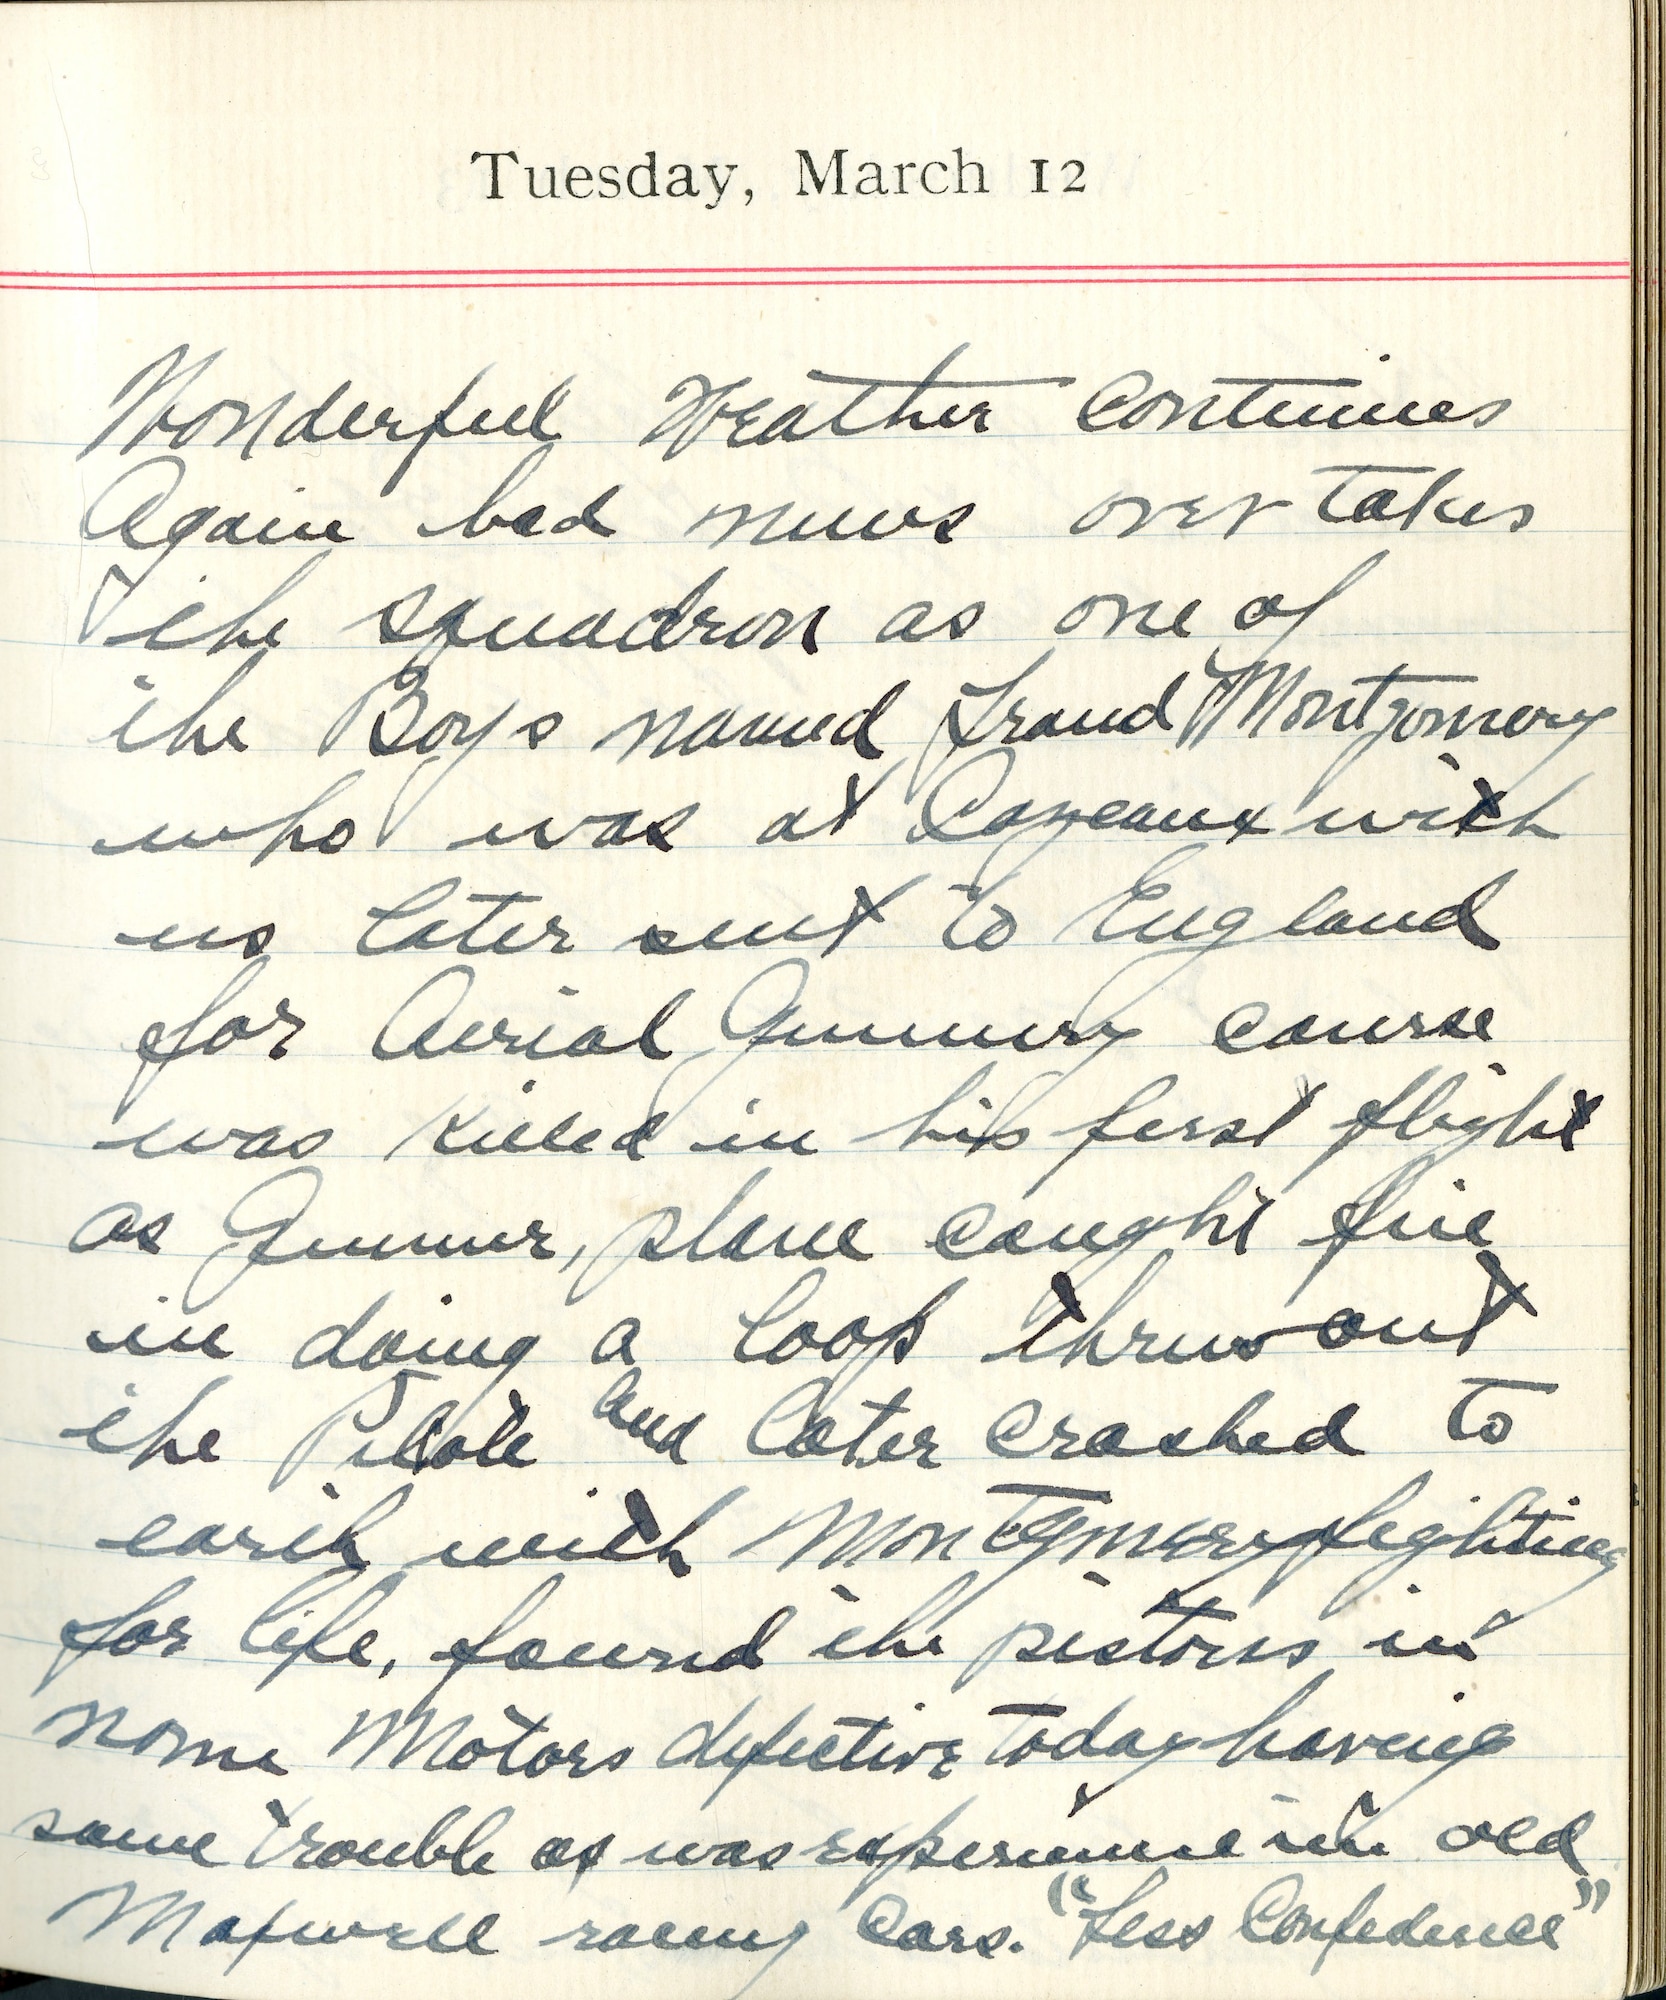 Capt. Edward V. Rickenbacker's 1918 wartime diary entry. (03/12/1918).

Wonderful weather continues.  Again bad news over takes the squadron as one of the boys named [illegible] Montgomery who was at Cazeaux with us, later sent to England for Aerial Gunnery course, was killed in his first flight as gunner.  Plane caught fire in doing a loop.  Threw out the pilot and later crashed to earth with Montgomery fighting for his life.  Found the pistons in the Gnome motors defective today having same trouble as was experienced in the old Maxwell racing cars.  “Less Confidence.”